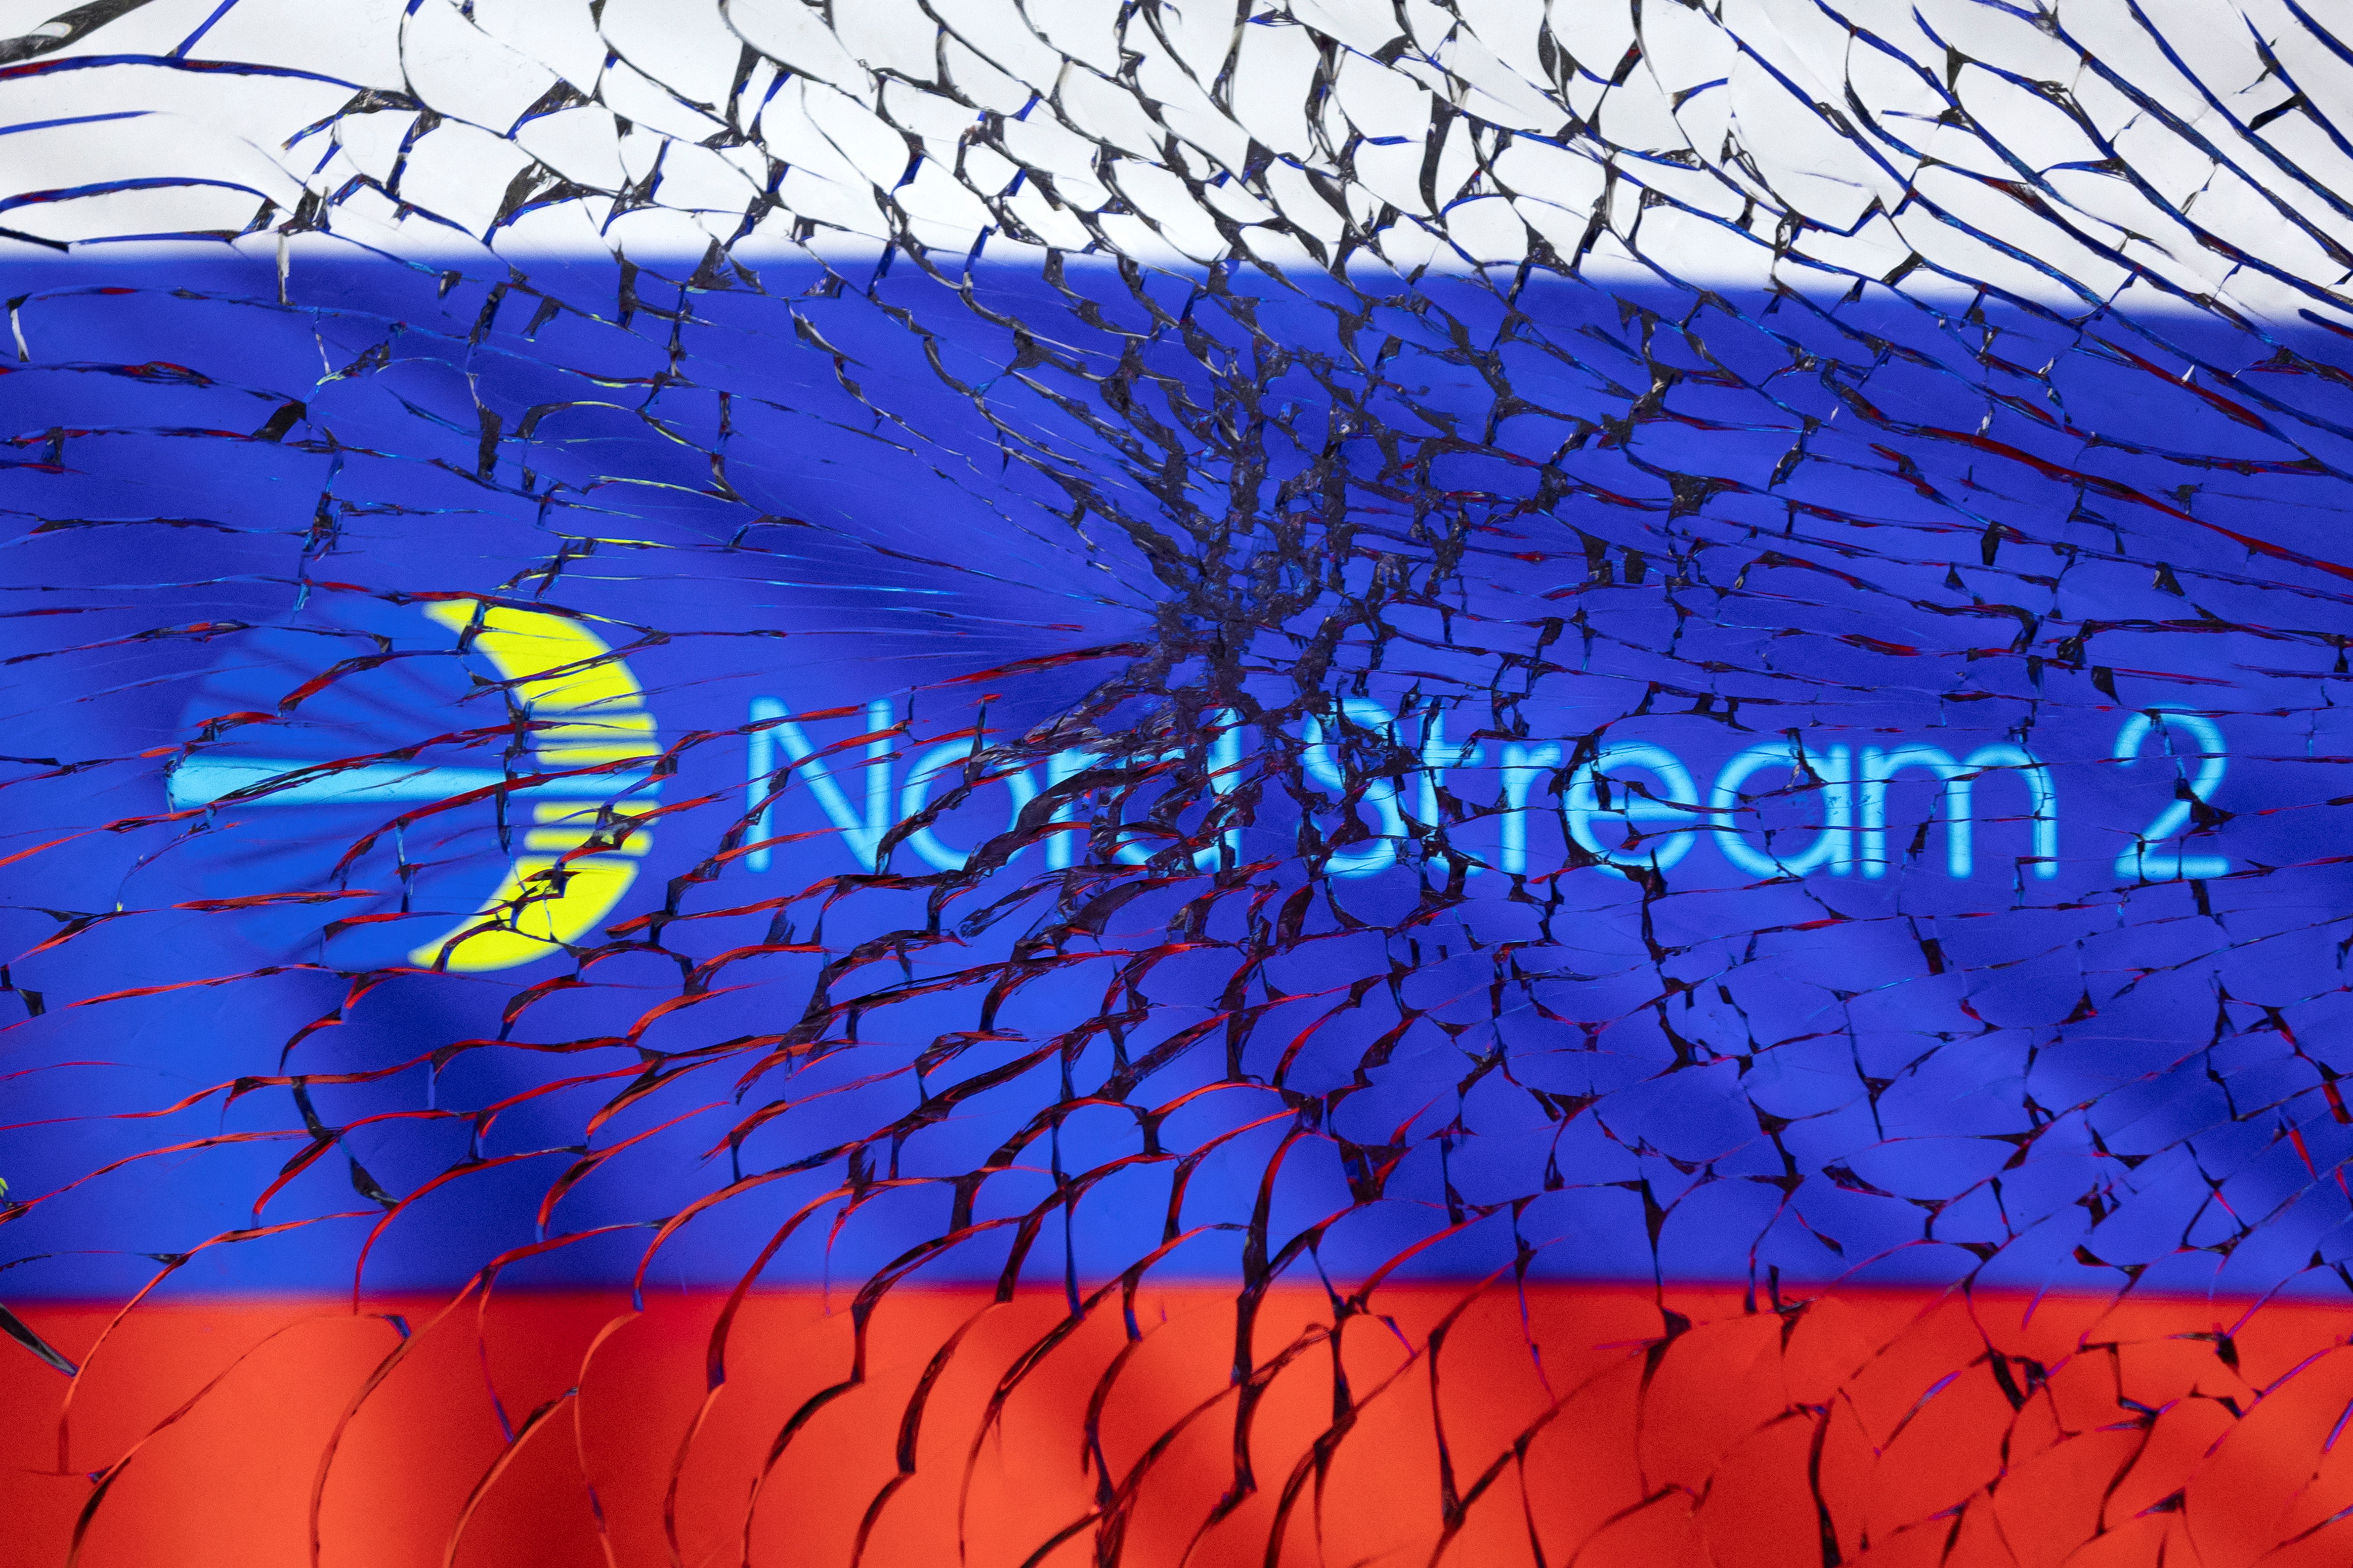 Illustration shows Nord Stream 2 logo and Russian flag through broken glass